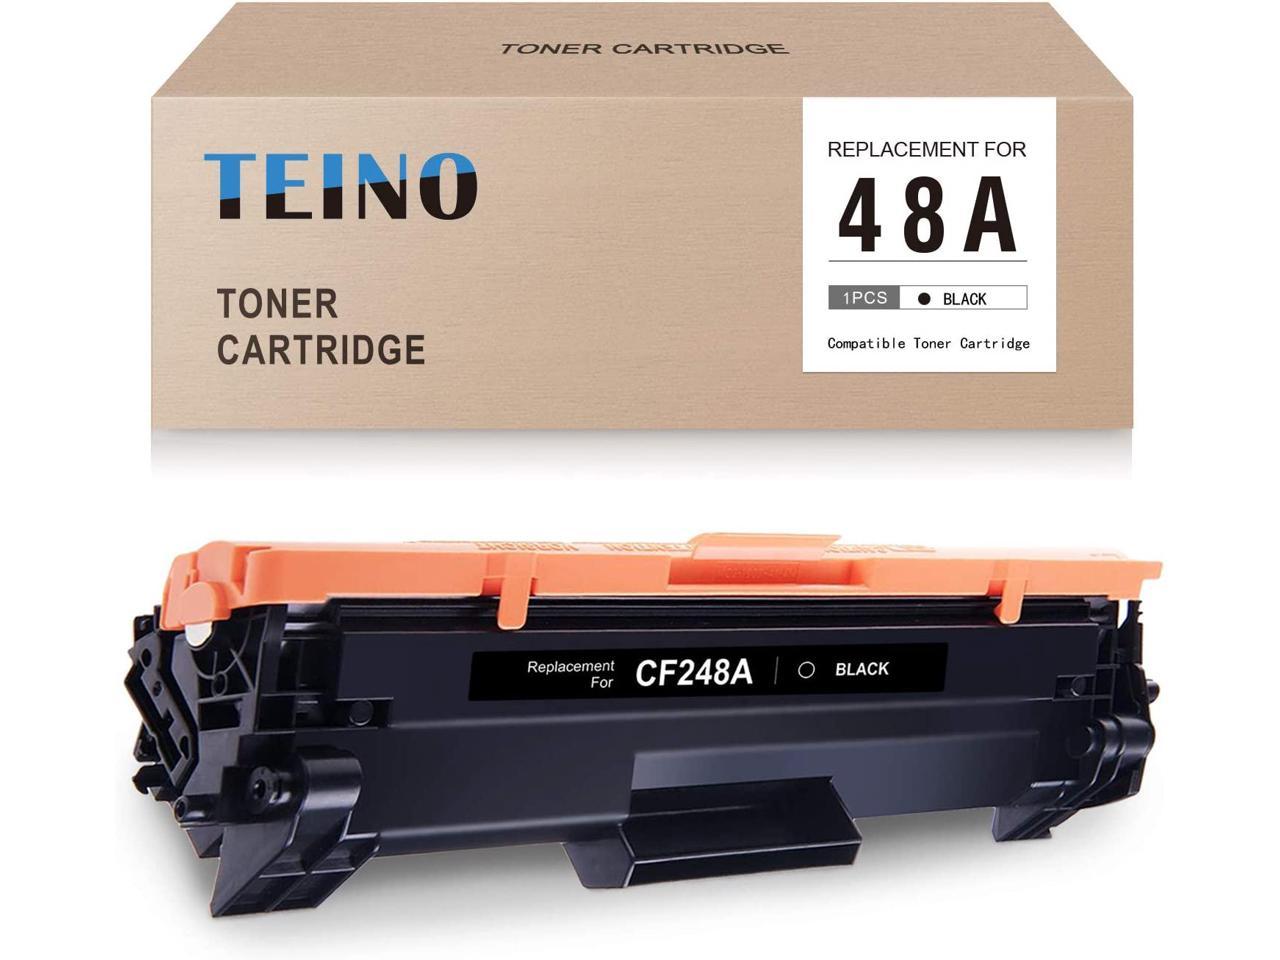 Toner Cartridge For HP Laserjet Pro 16 M15 M28 M29 with chip 1Pack 48A CF248A 